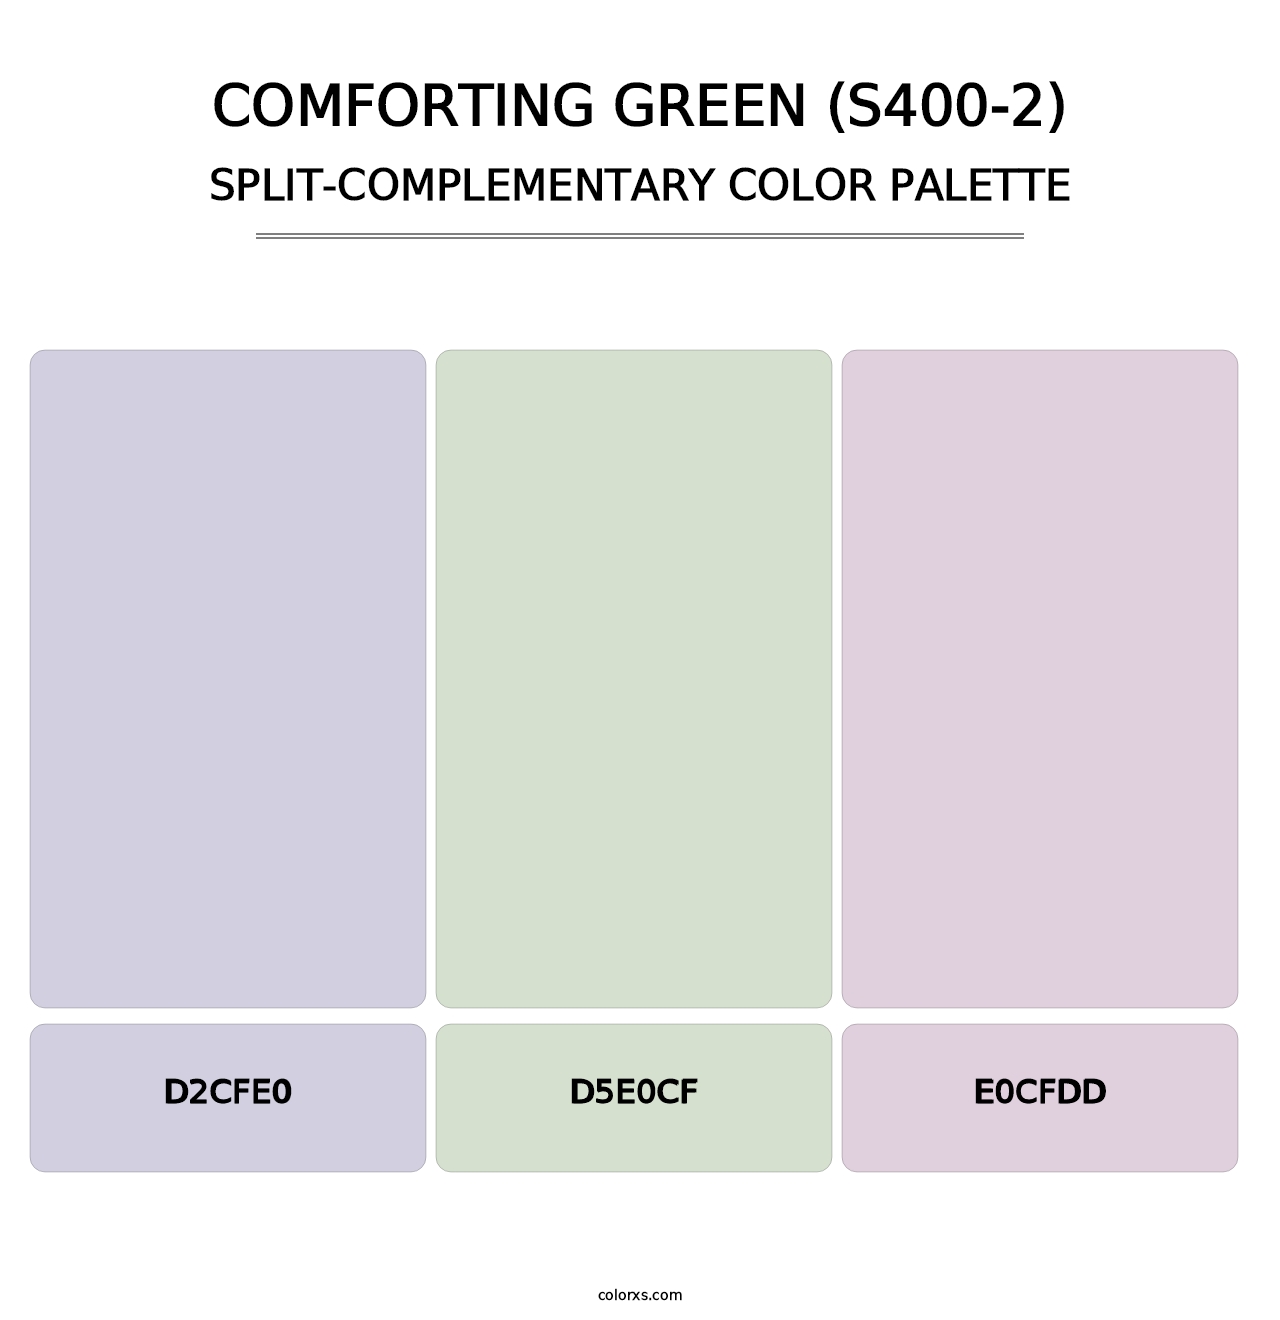 Comforting Green (S400-2) - Split-Complementary Color Palette